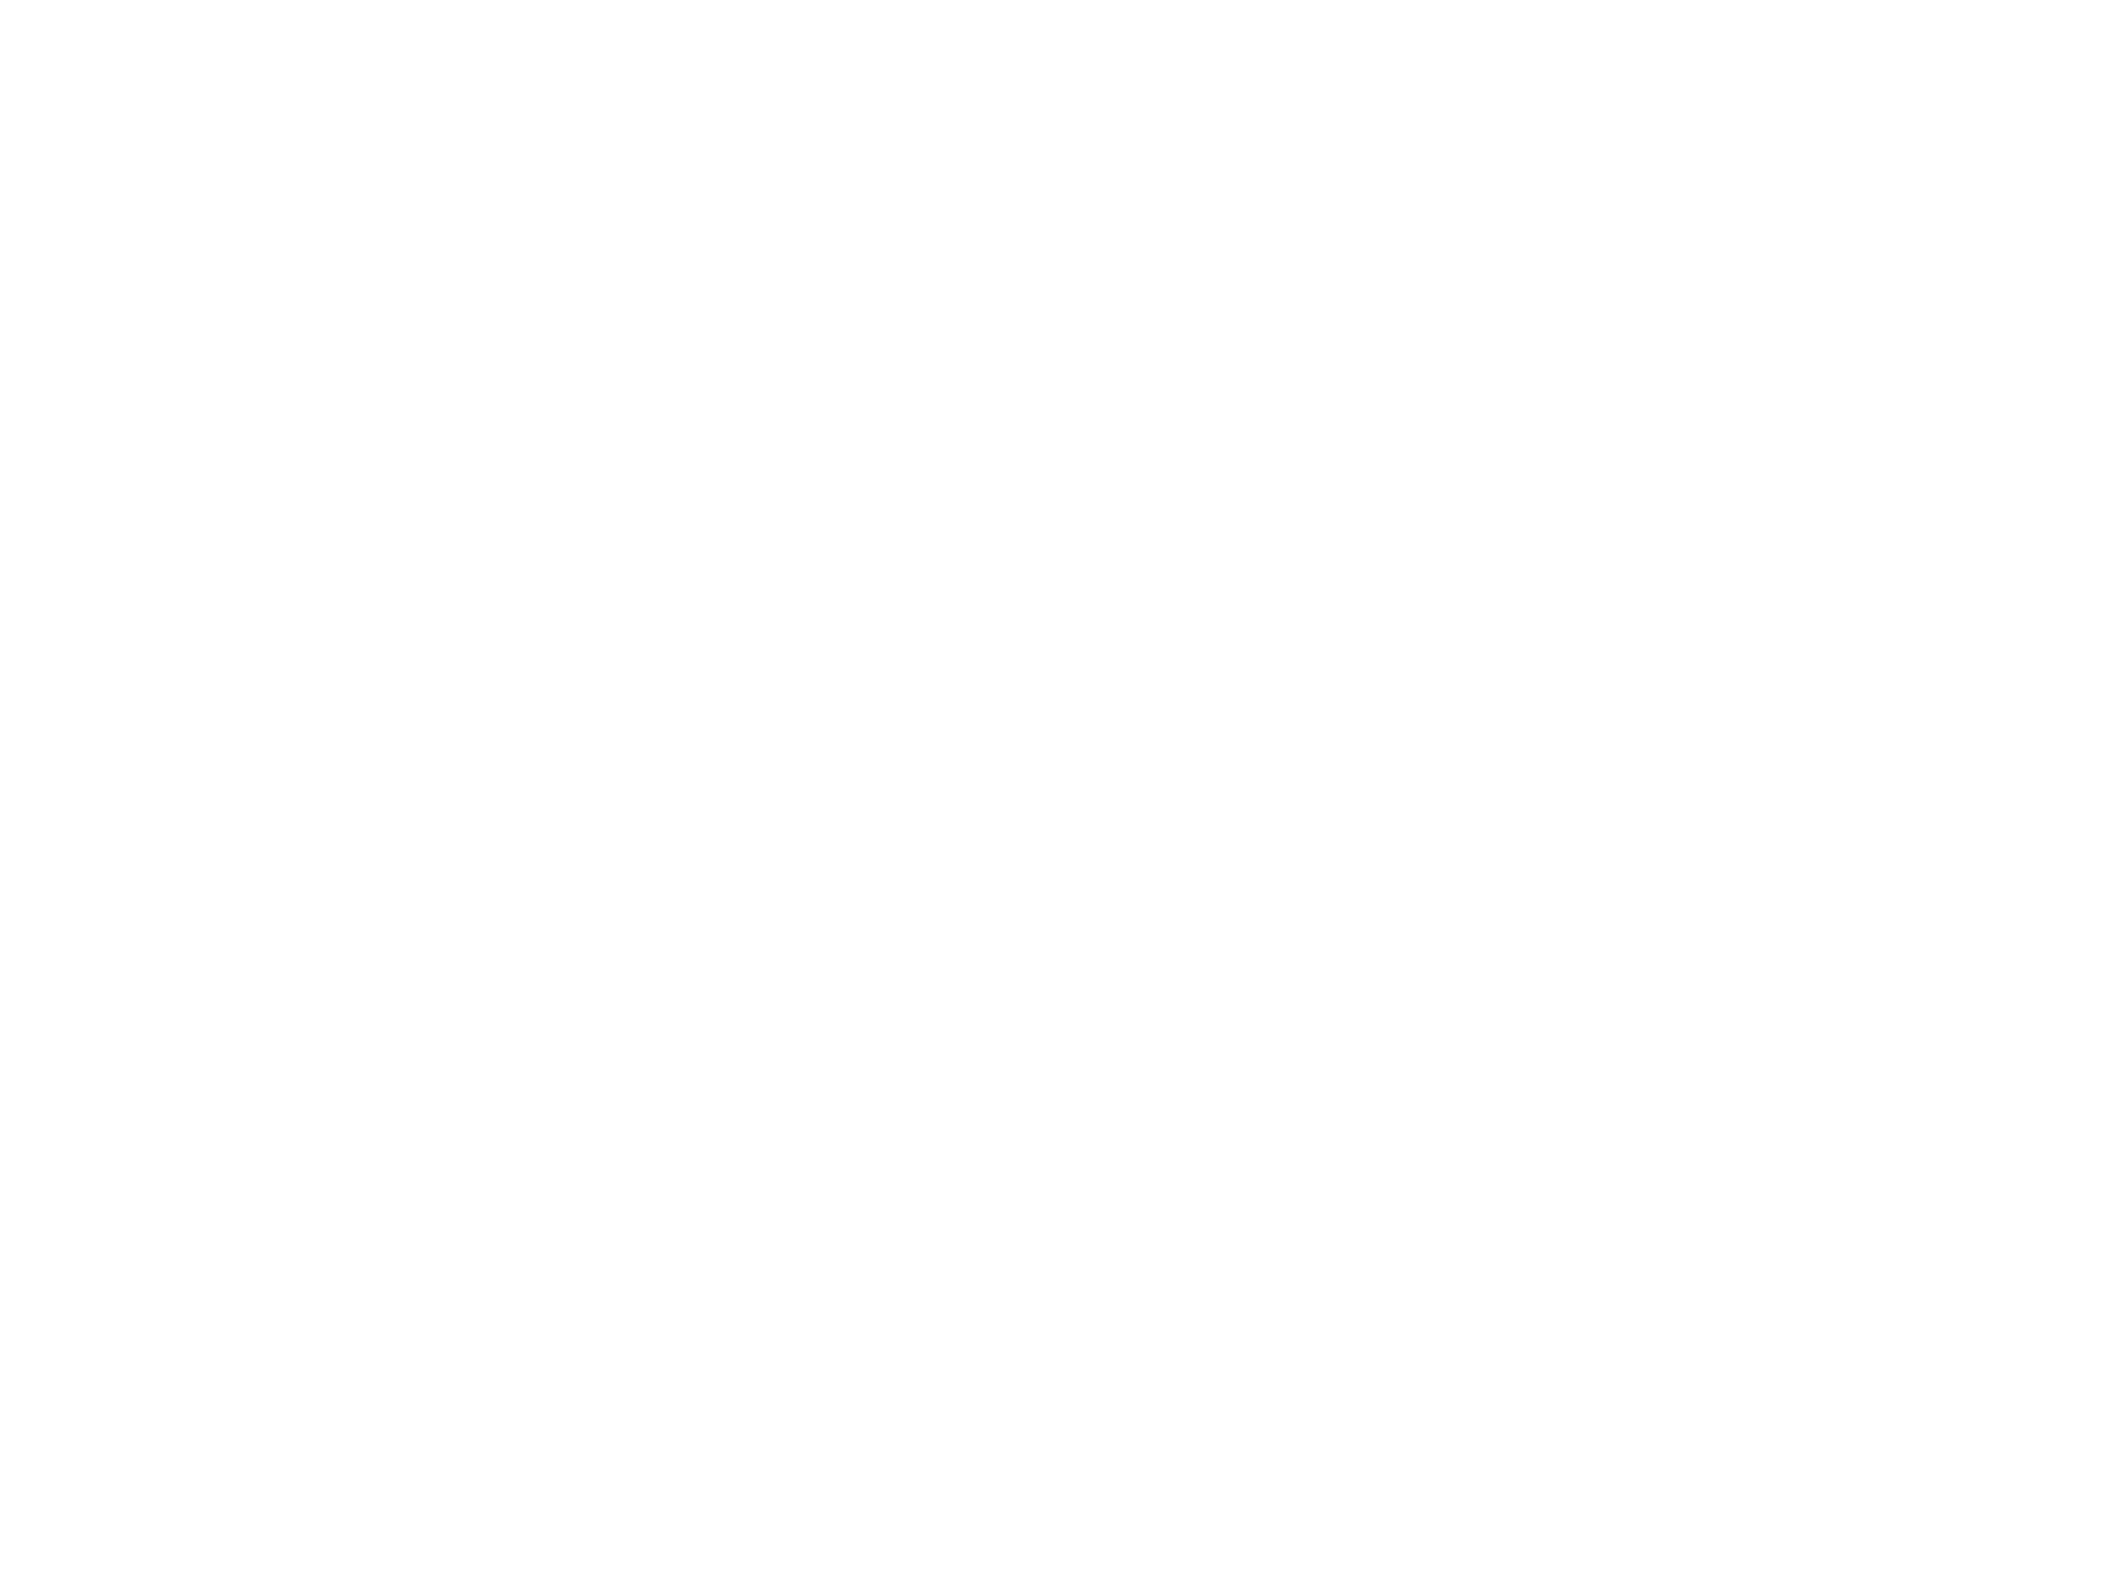 Morgan Payne Law, Family Law and Real Estate Law